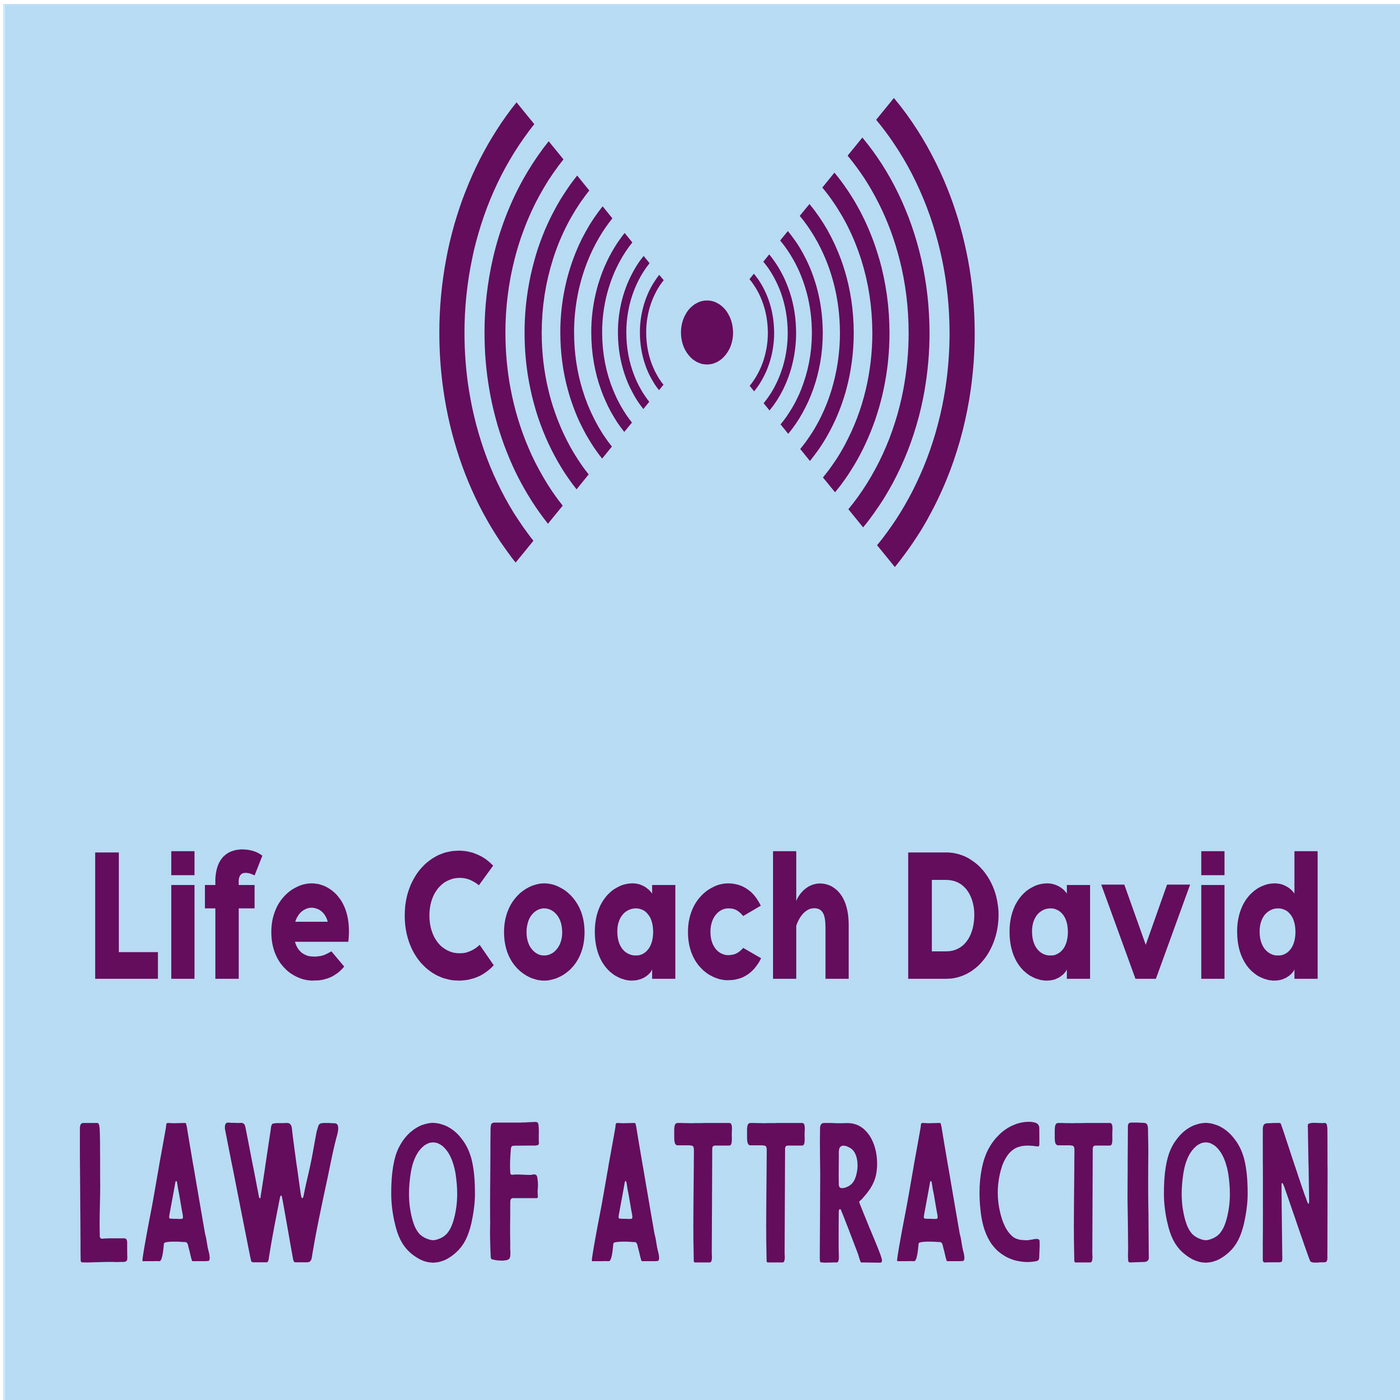 Law of Attraction for Beginners - The Ultimate Guide 2020